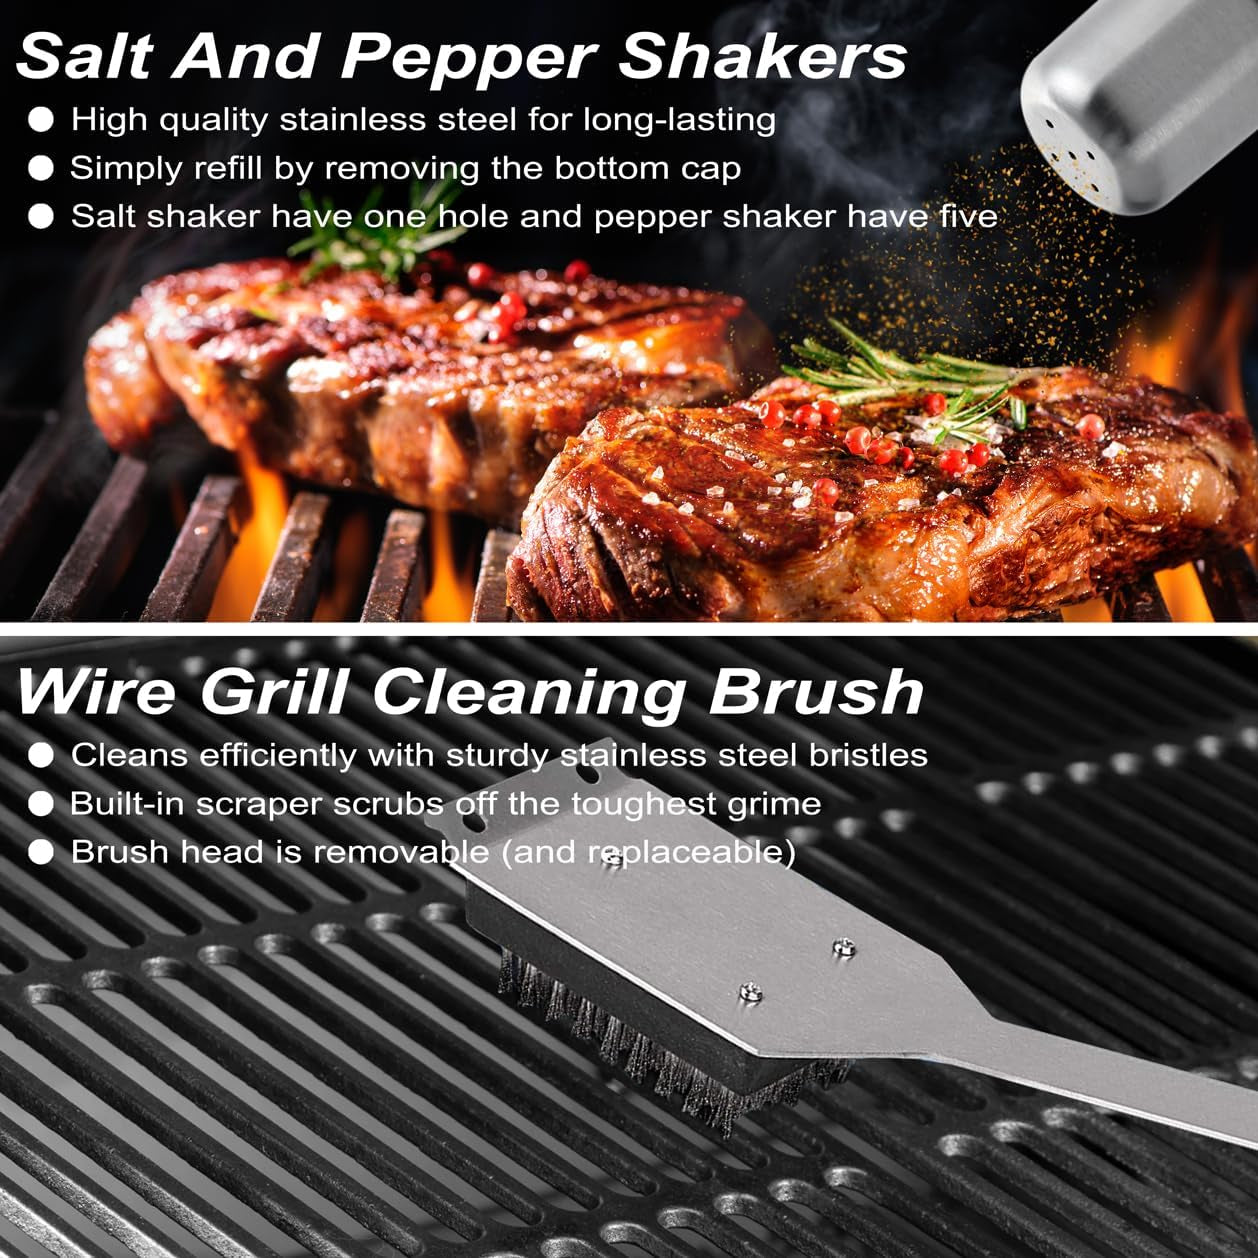 29 PCS BBQ Grill Accessories Stainless Steel BBQ Tools Grilling Tools Set with Storage Bag for Father'S Day Birthday Presents - Camping Grill Utensils Set Ideal Grilling Gifts for Men Dad Women